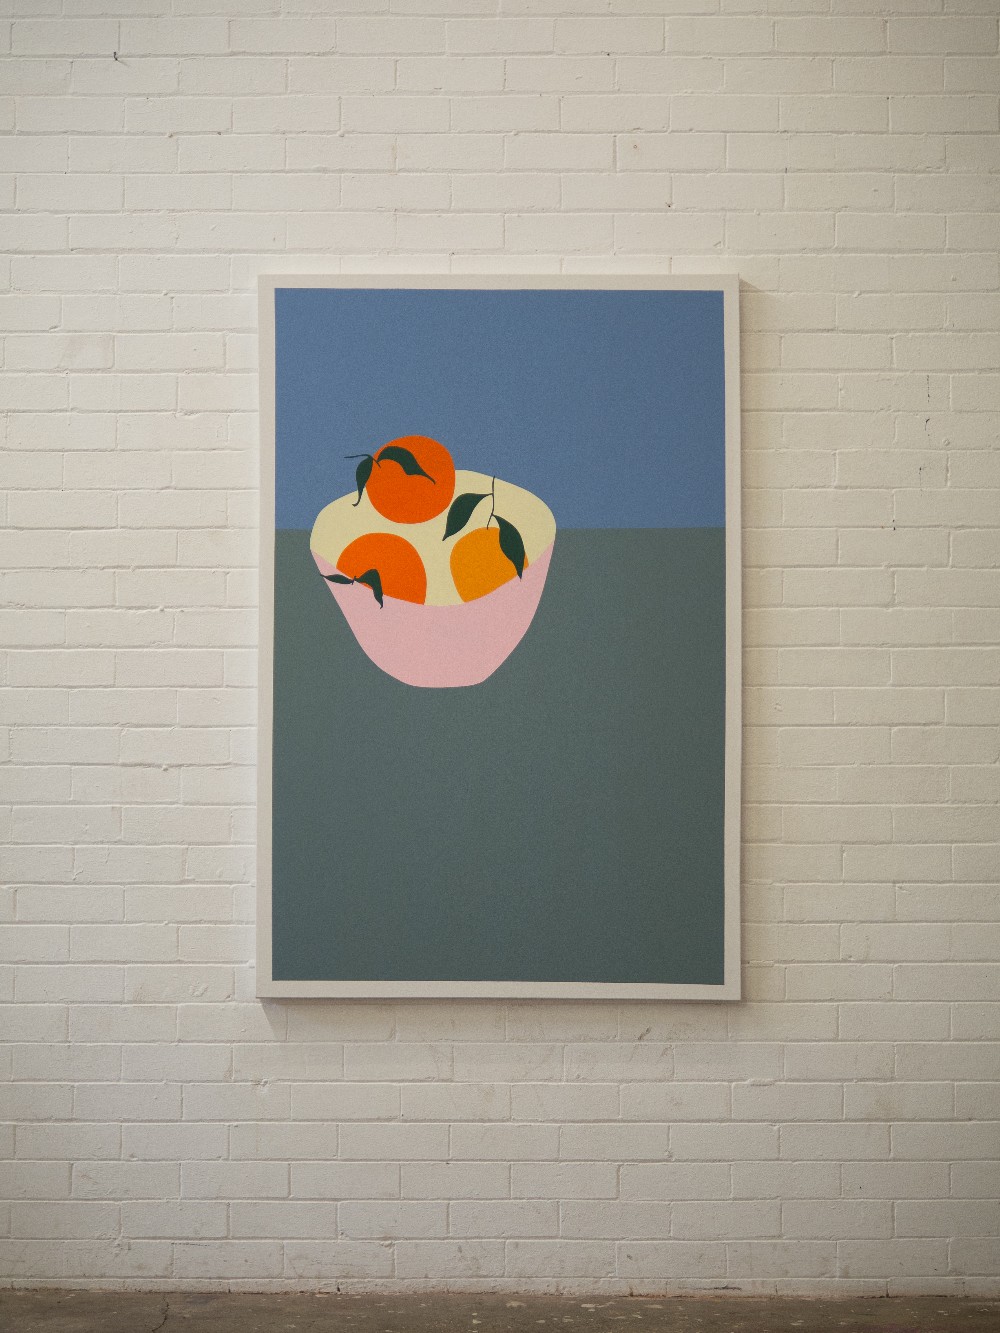 Freya Stockford, "Bowl with Oranges", unframed acrylic and gesso on canvas, 2021, 150 x 100 x - Image 2 of 3